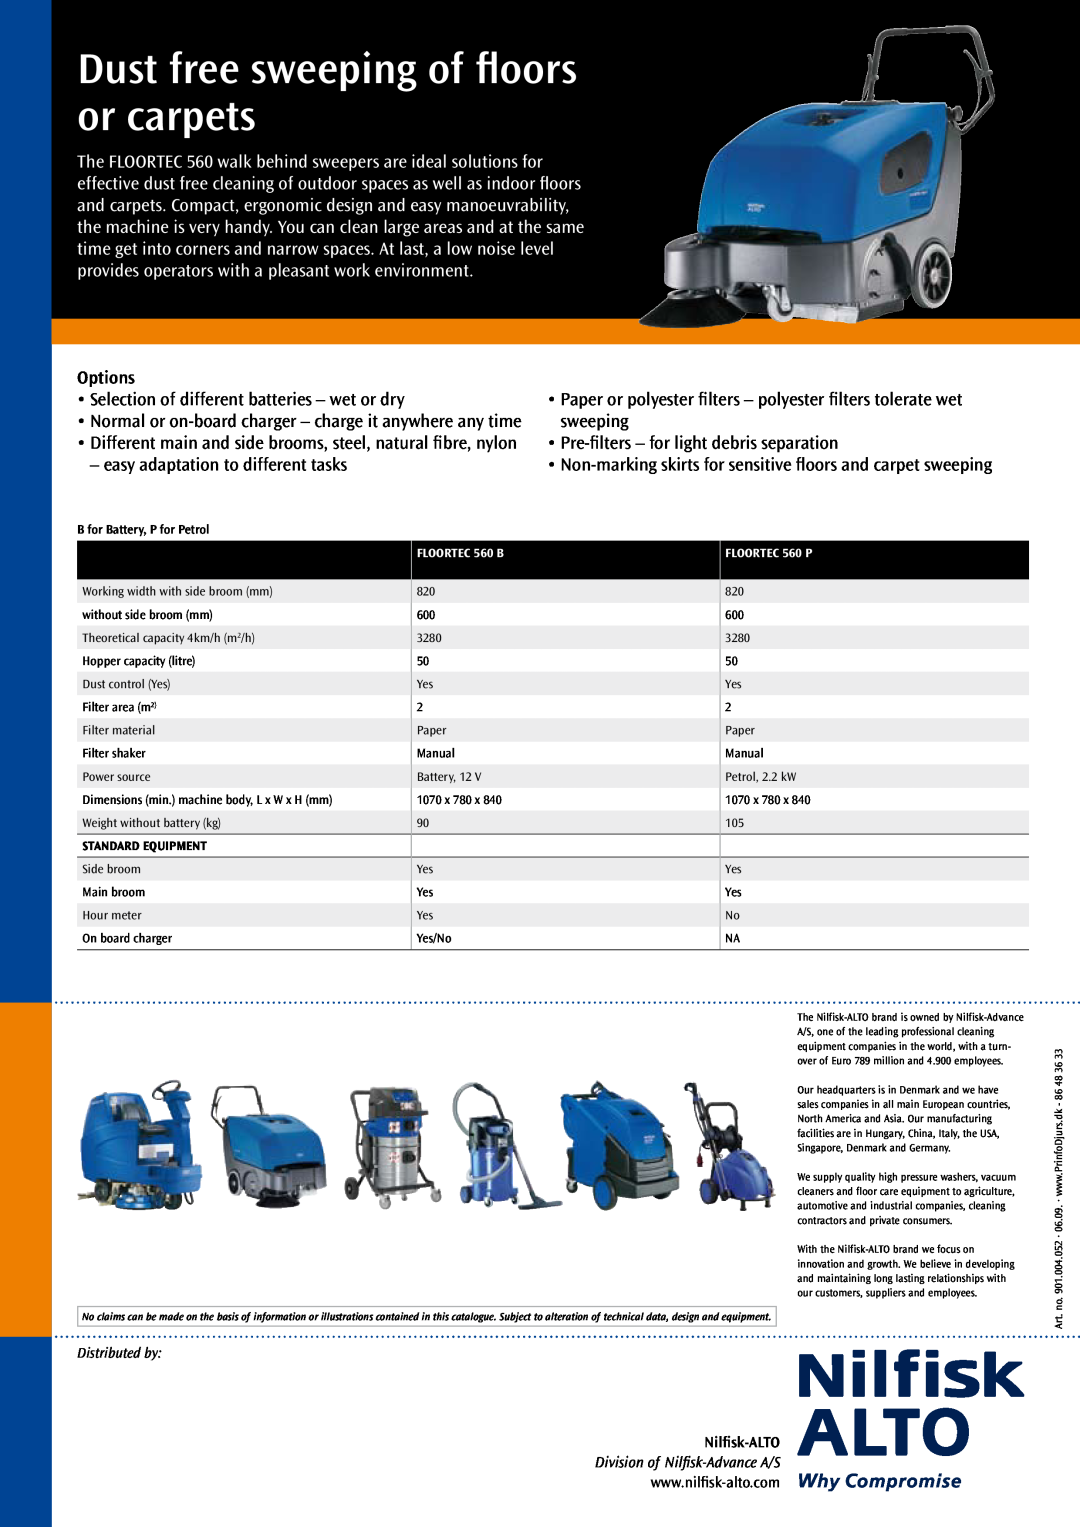 Nilfisk-ALTO 560 manual Options, Dust free sweeping of floors or carpets, Distributed by, Nilfisk-ALTO, Standard equipment 